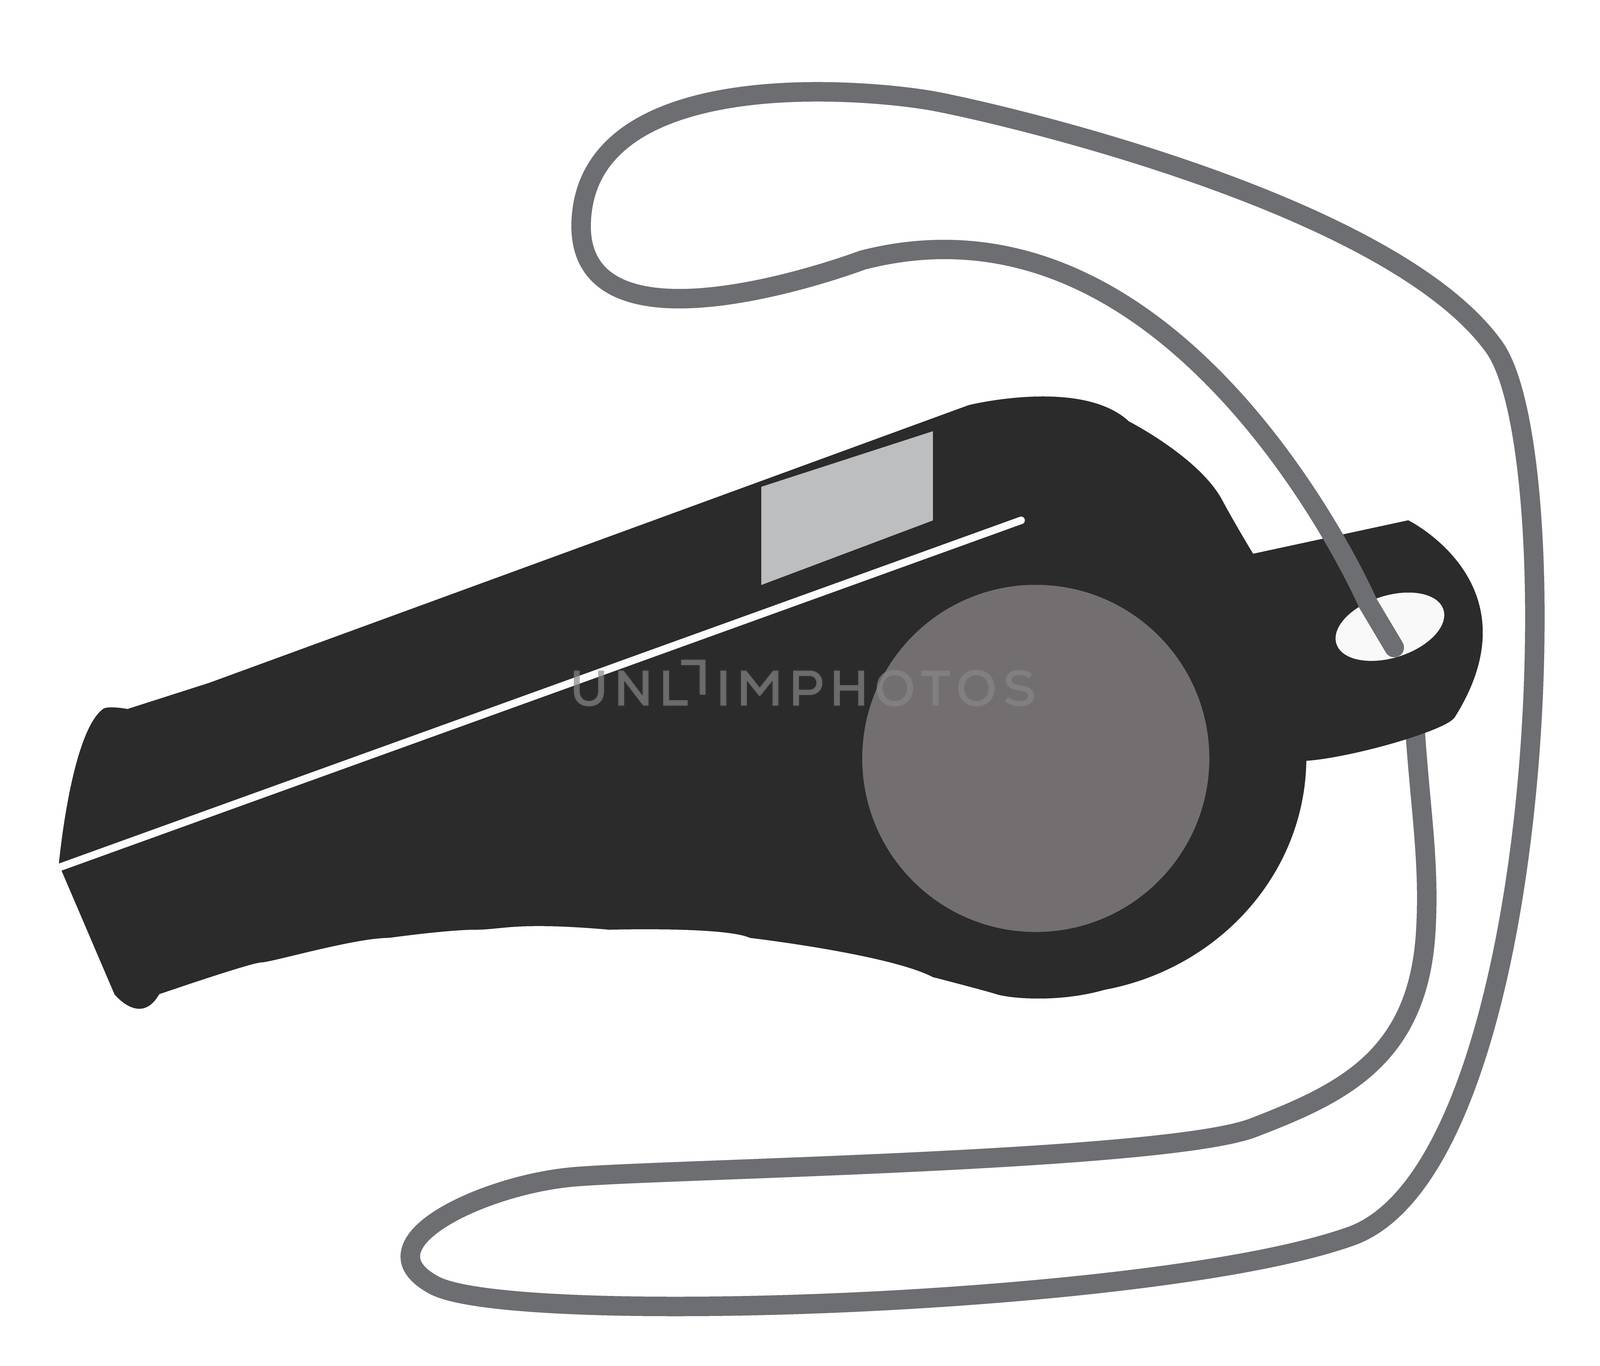 whistle icon on white background. whistle sign. flat style desig by suthee